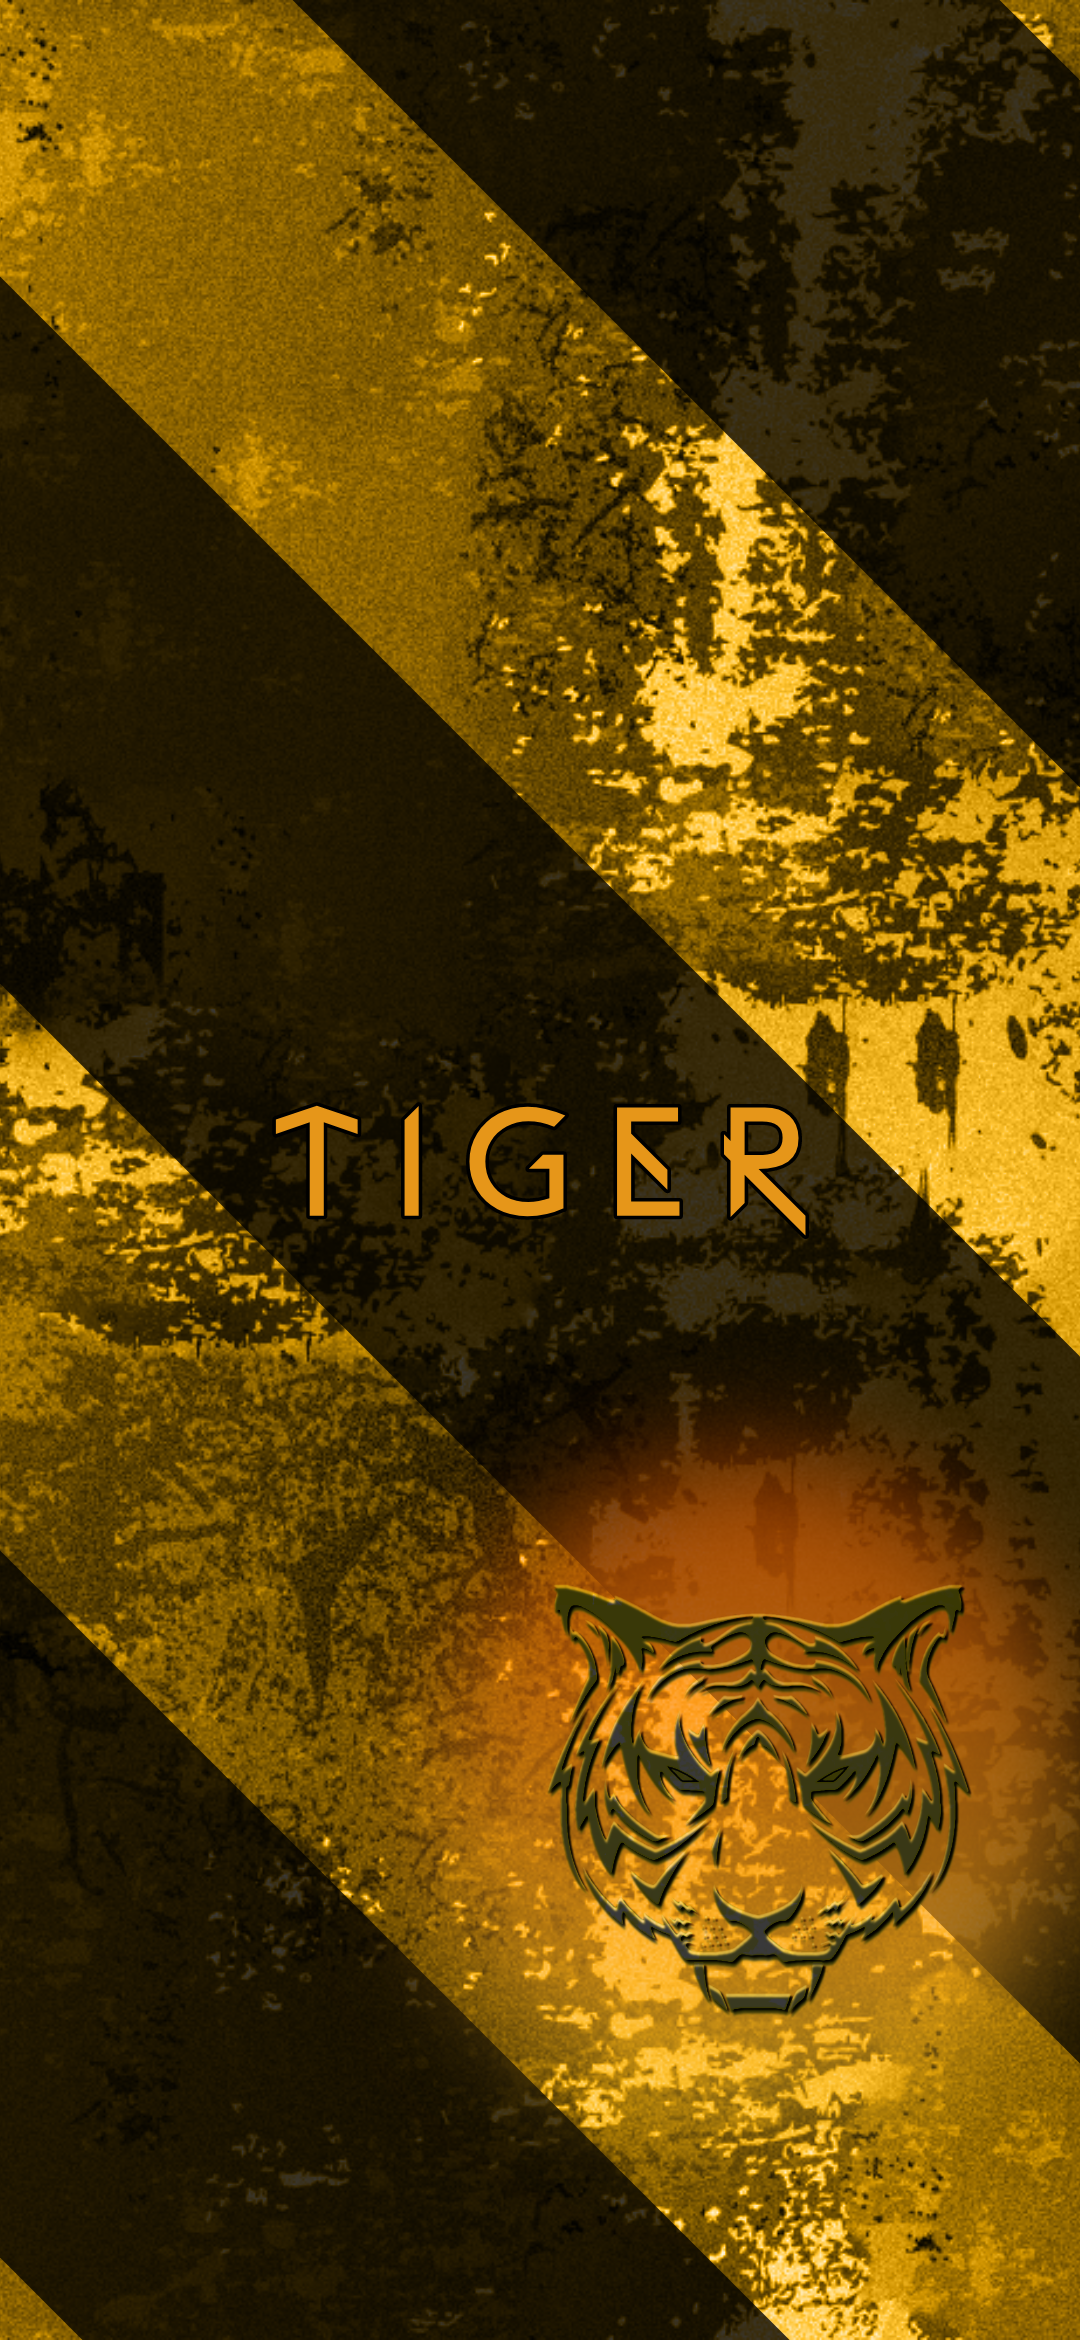 Wallpaper Tiger Head Tattoo, Graphic Design, Poster, Brown, Amber,  Background - Download Free Image